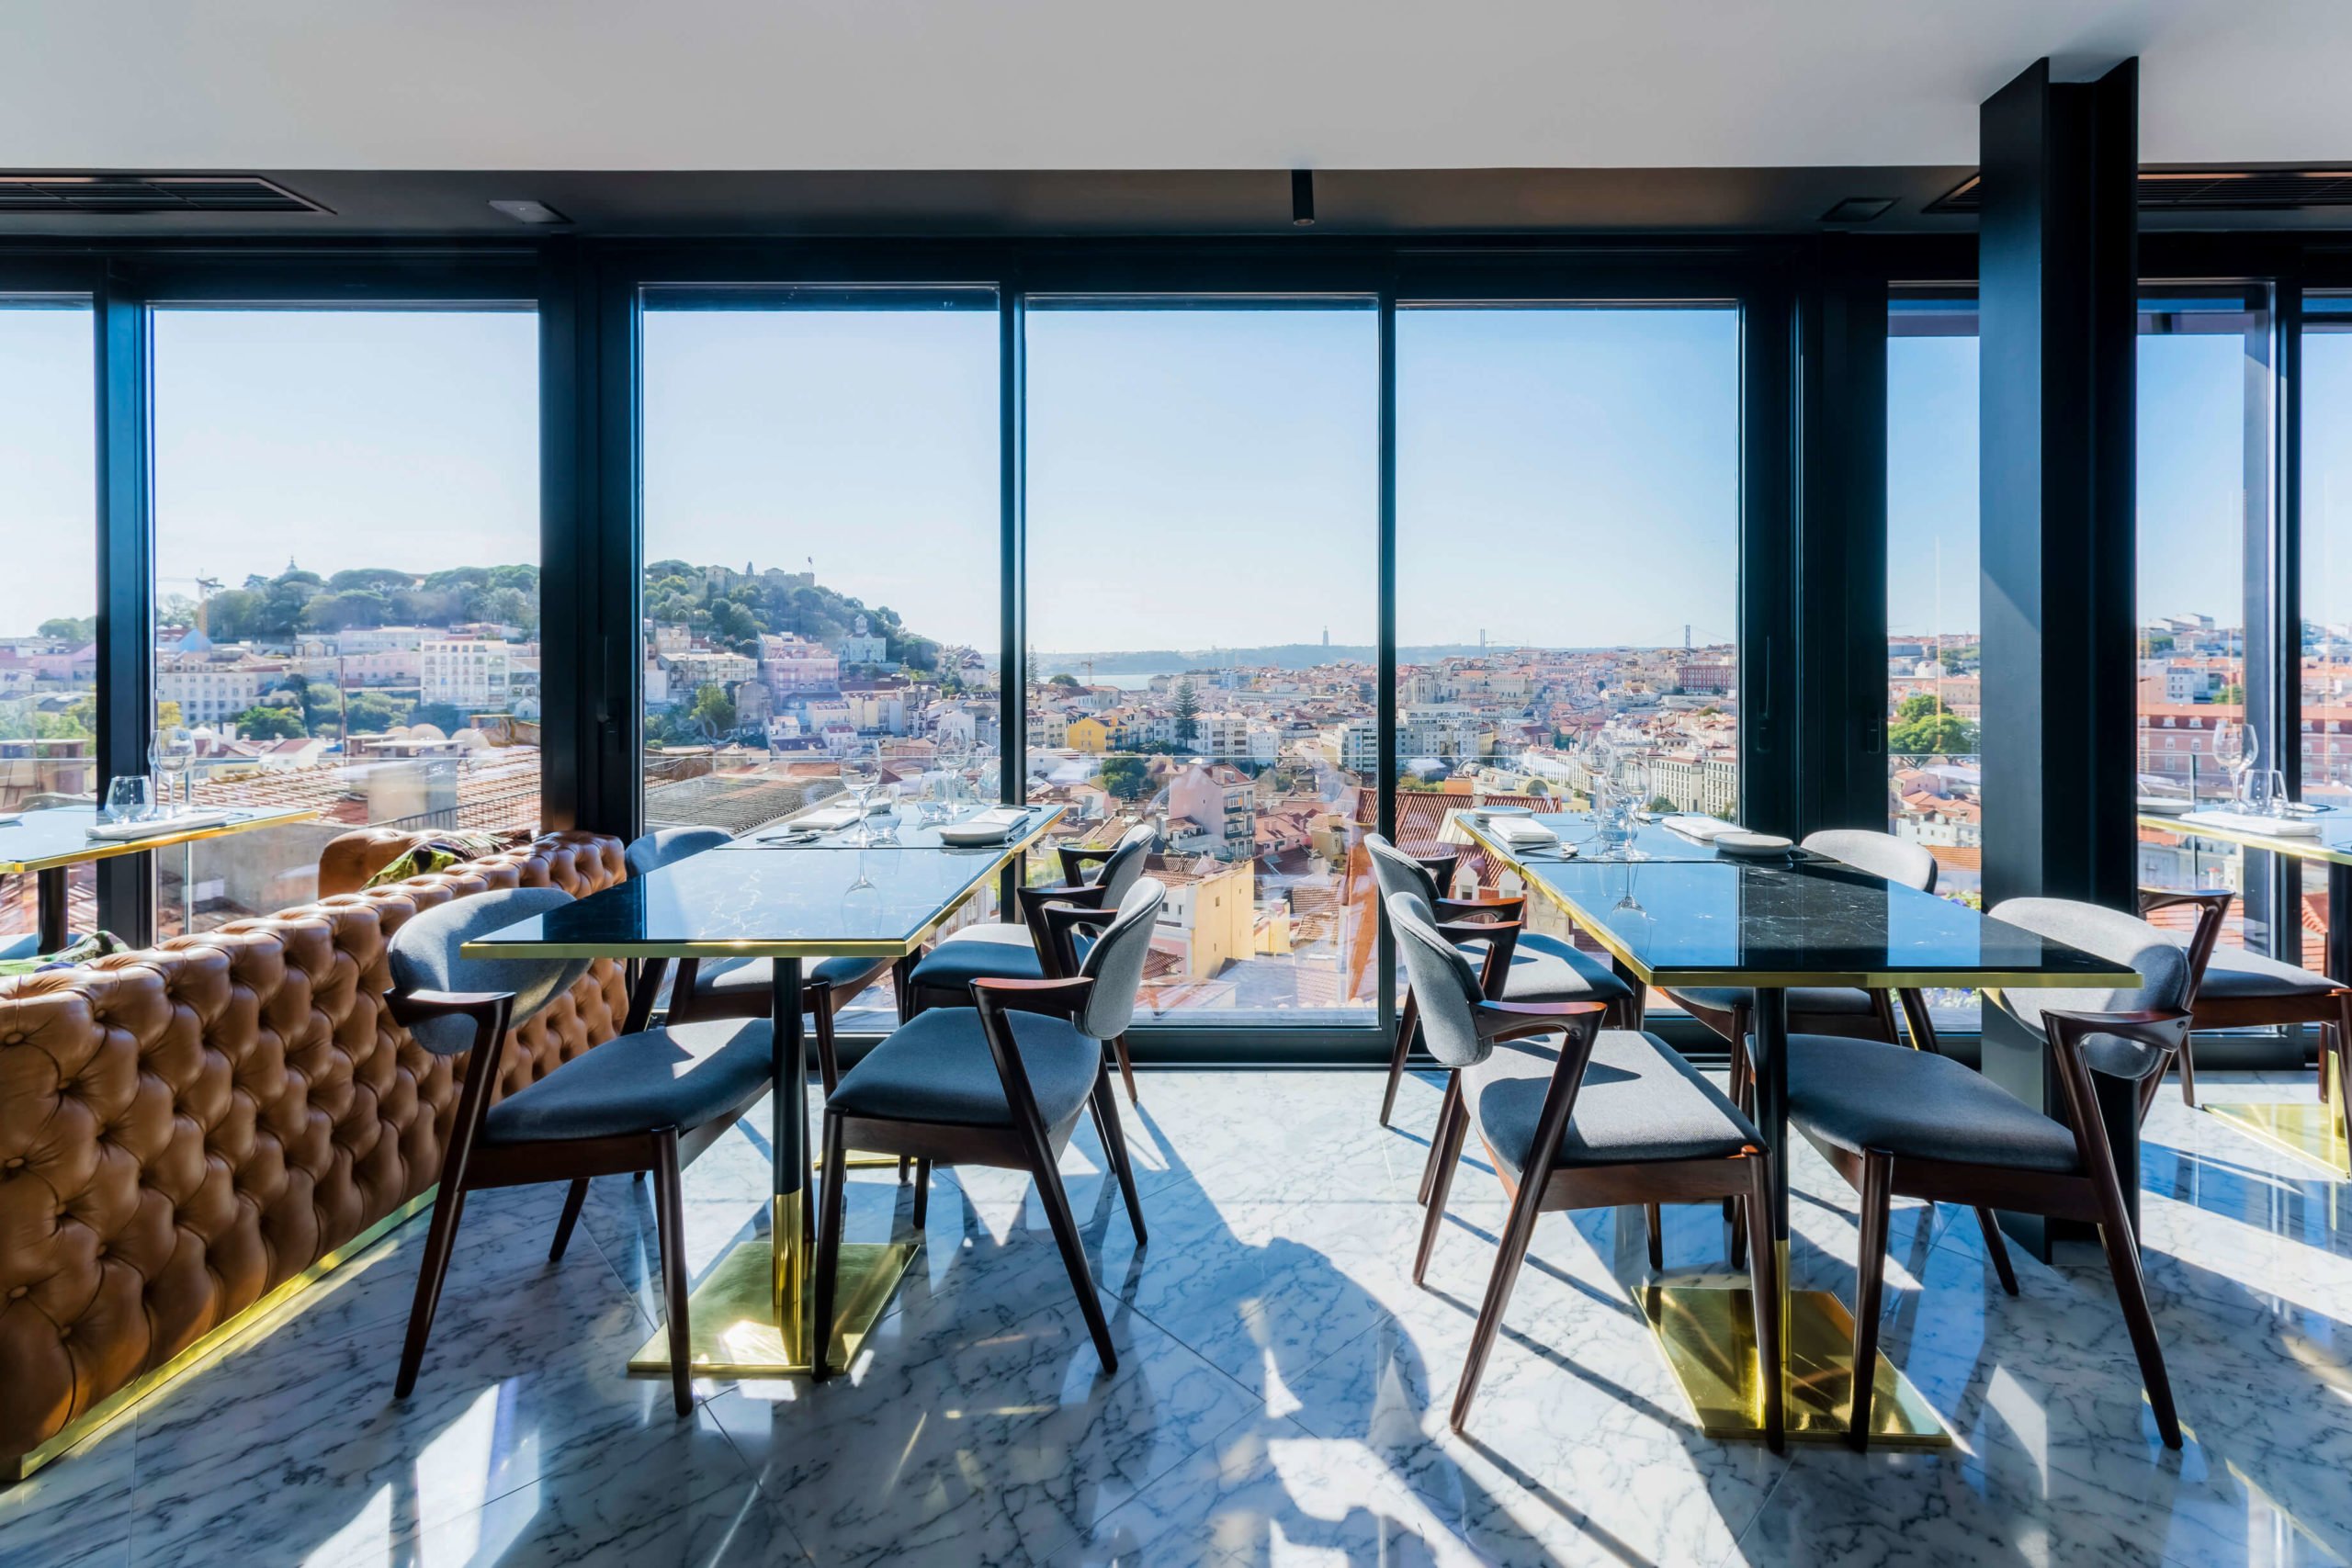 The restaurant's main room, with magnificent windows overlooking the city of Lisbon.